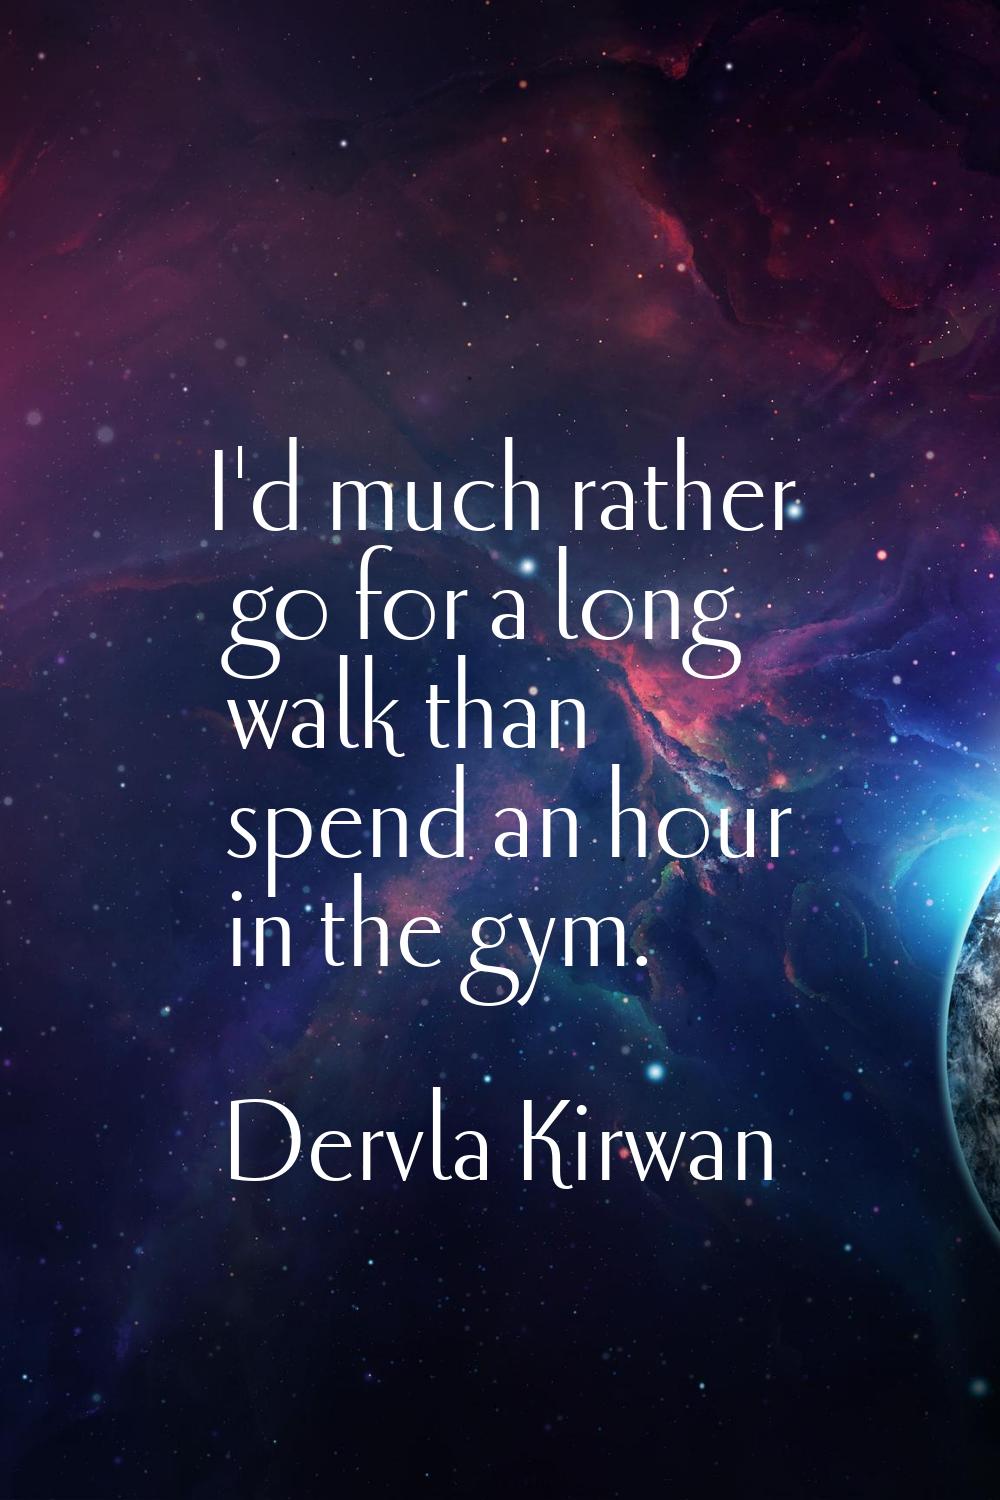 I'd much rather go for a long walk than spend an hour in the gym.